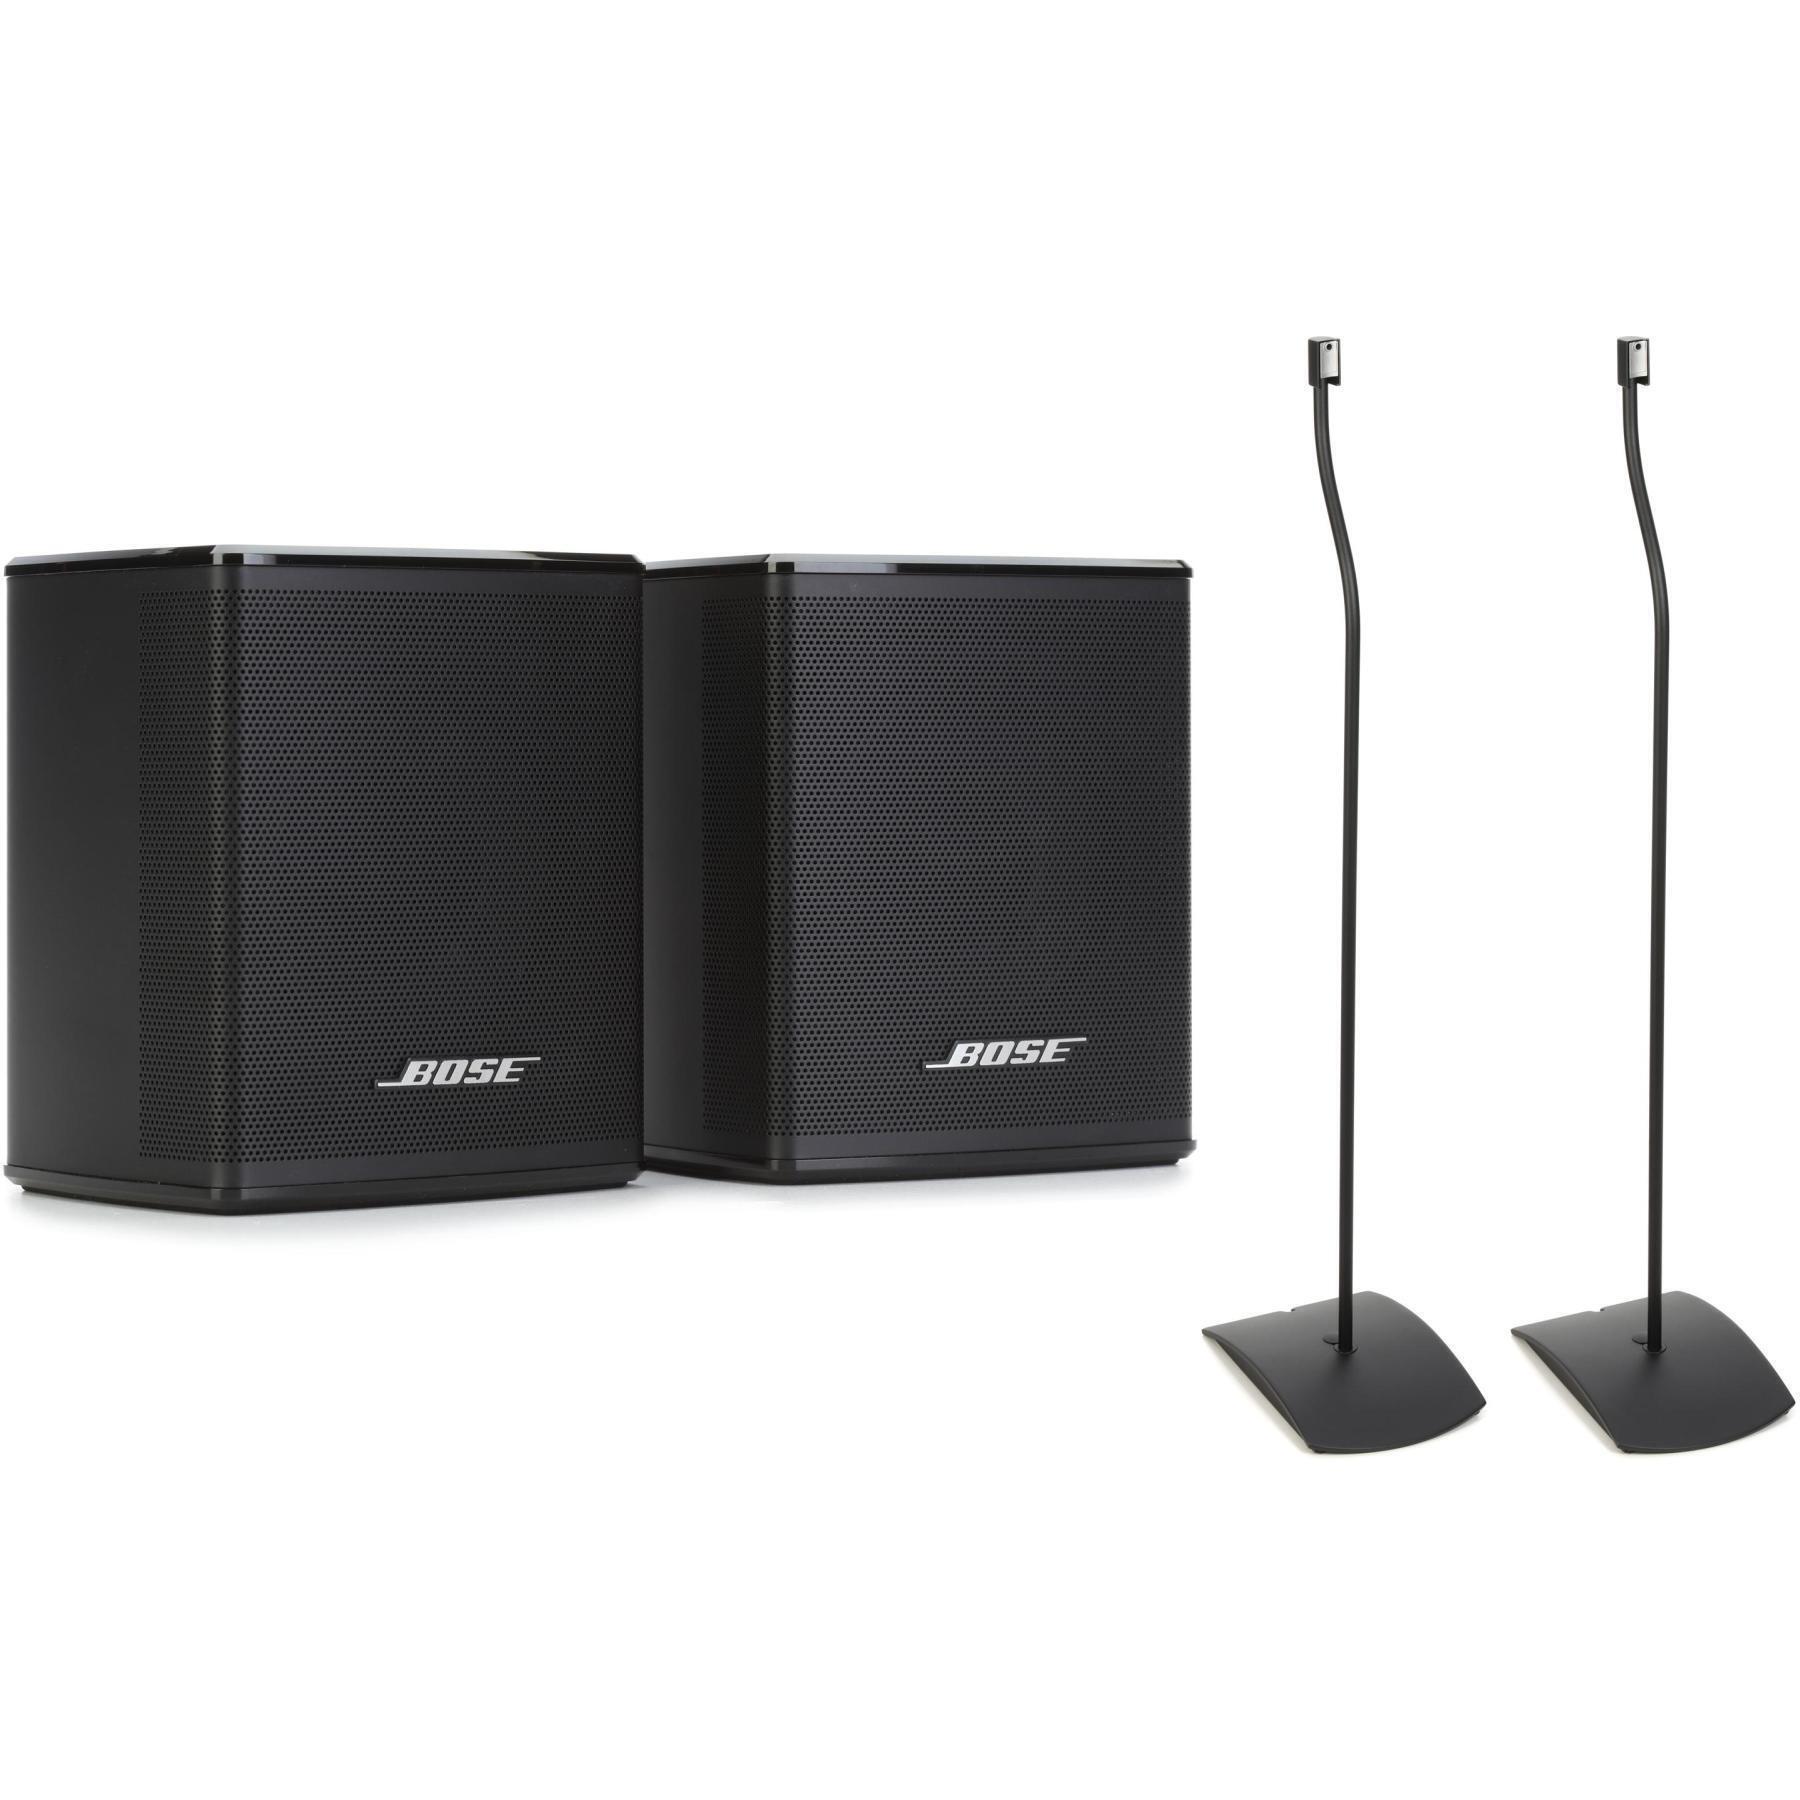 Bose Surround Speakers with Stands - Black